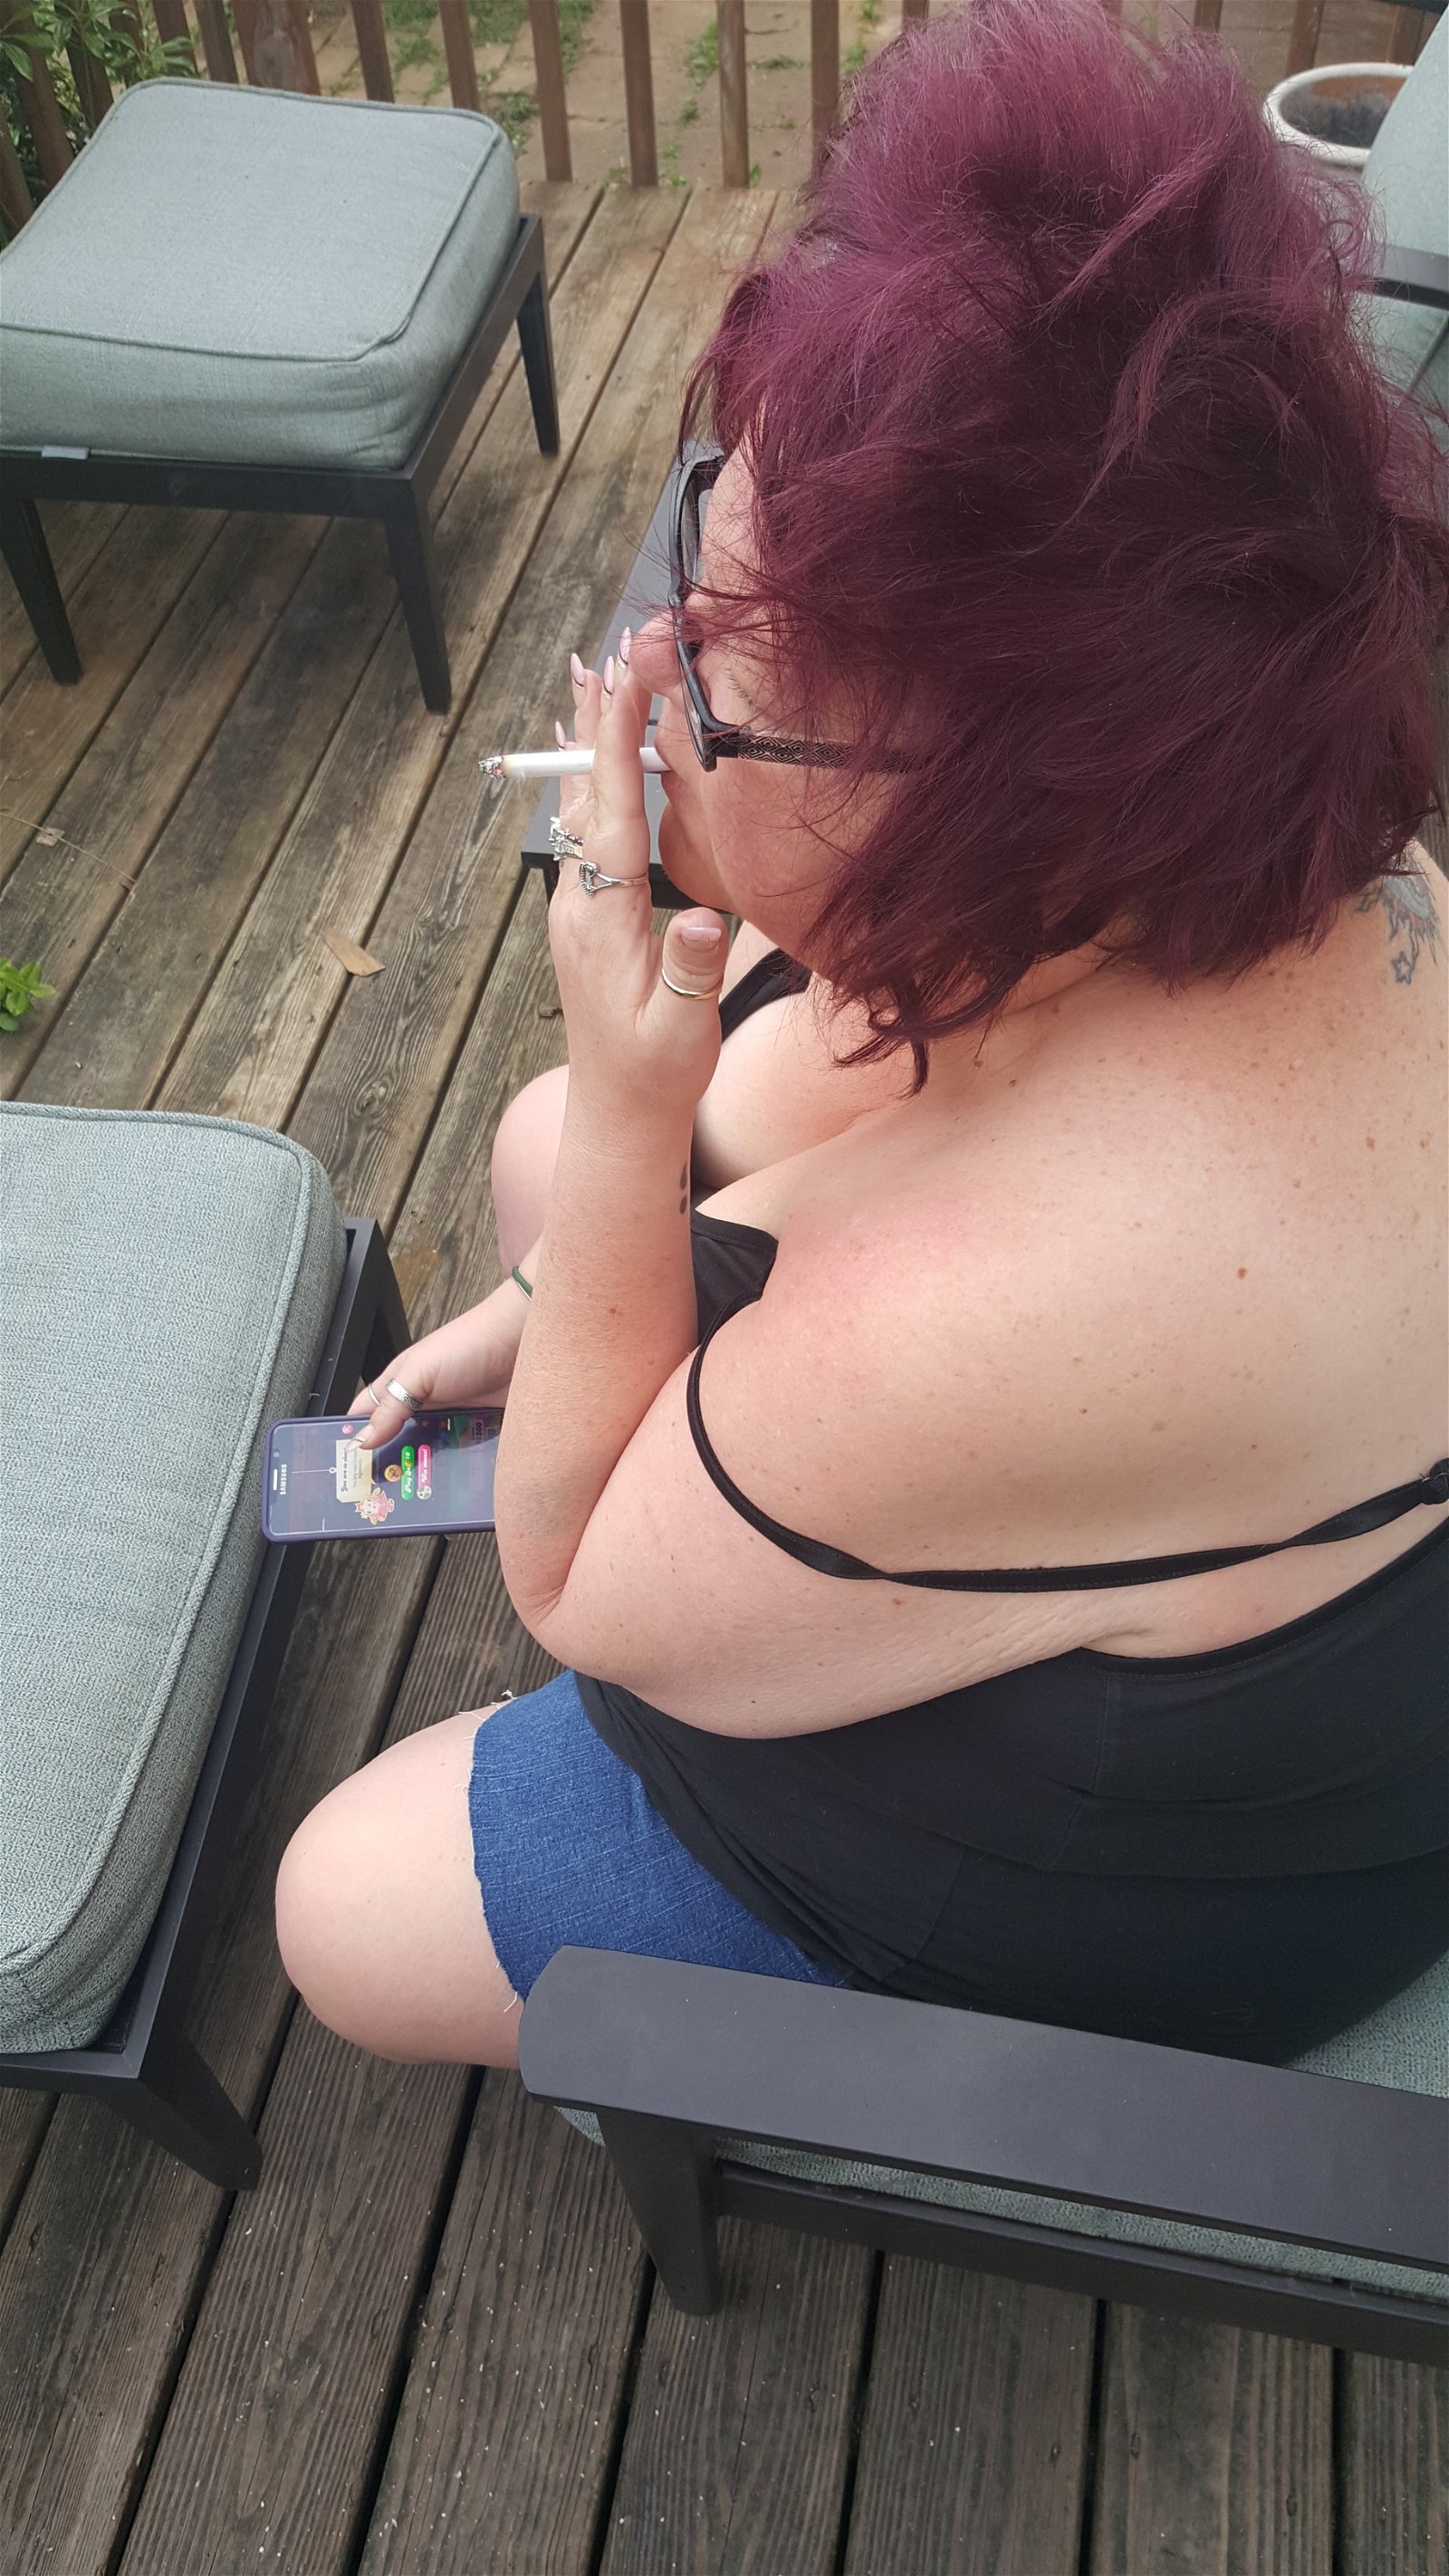 Photo by Dawn42D with the username @Dawn42D,  July 28, 2017 at 1:56 PM and the text says 'I love watching the Mrs smoke. She has some serious sex hair going on in these. #bbw  #bbw  #wife  #smoking  #smoking  #wife  #smoking  #fetish  #cleavage  #downblouse  #unaware  #wife  #sex  #hair  #don't  #care  #WVHotBBW  #wvhb  #Dawn42D'